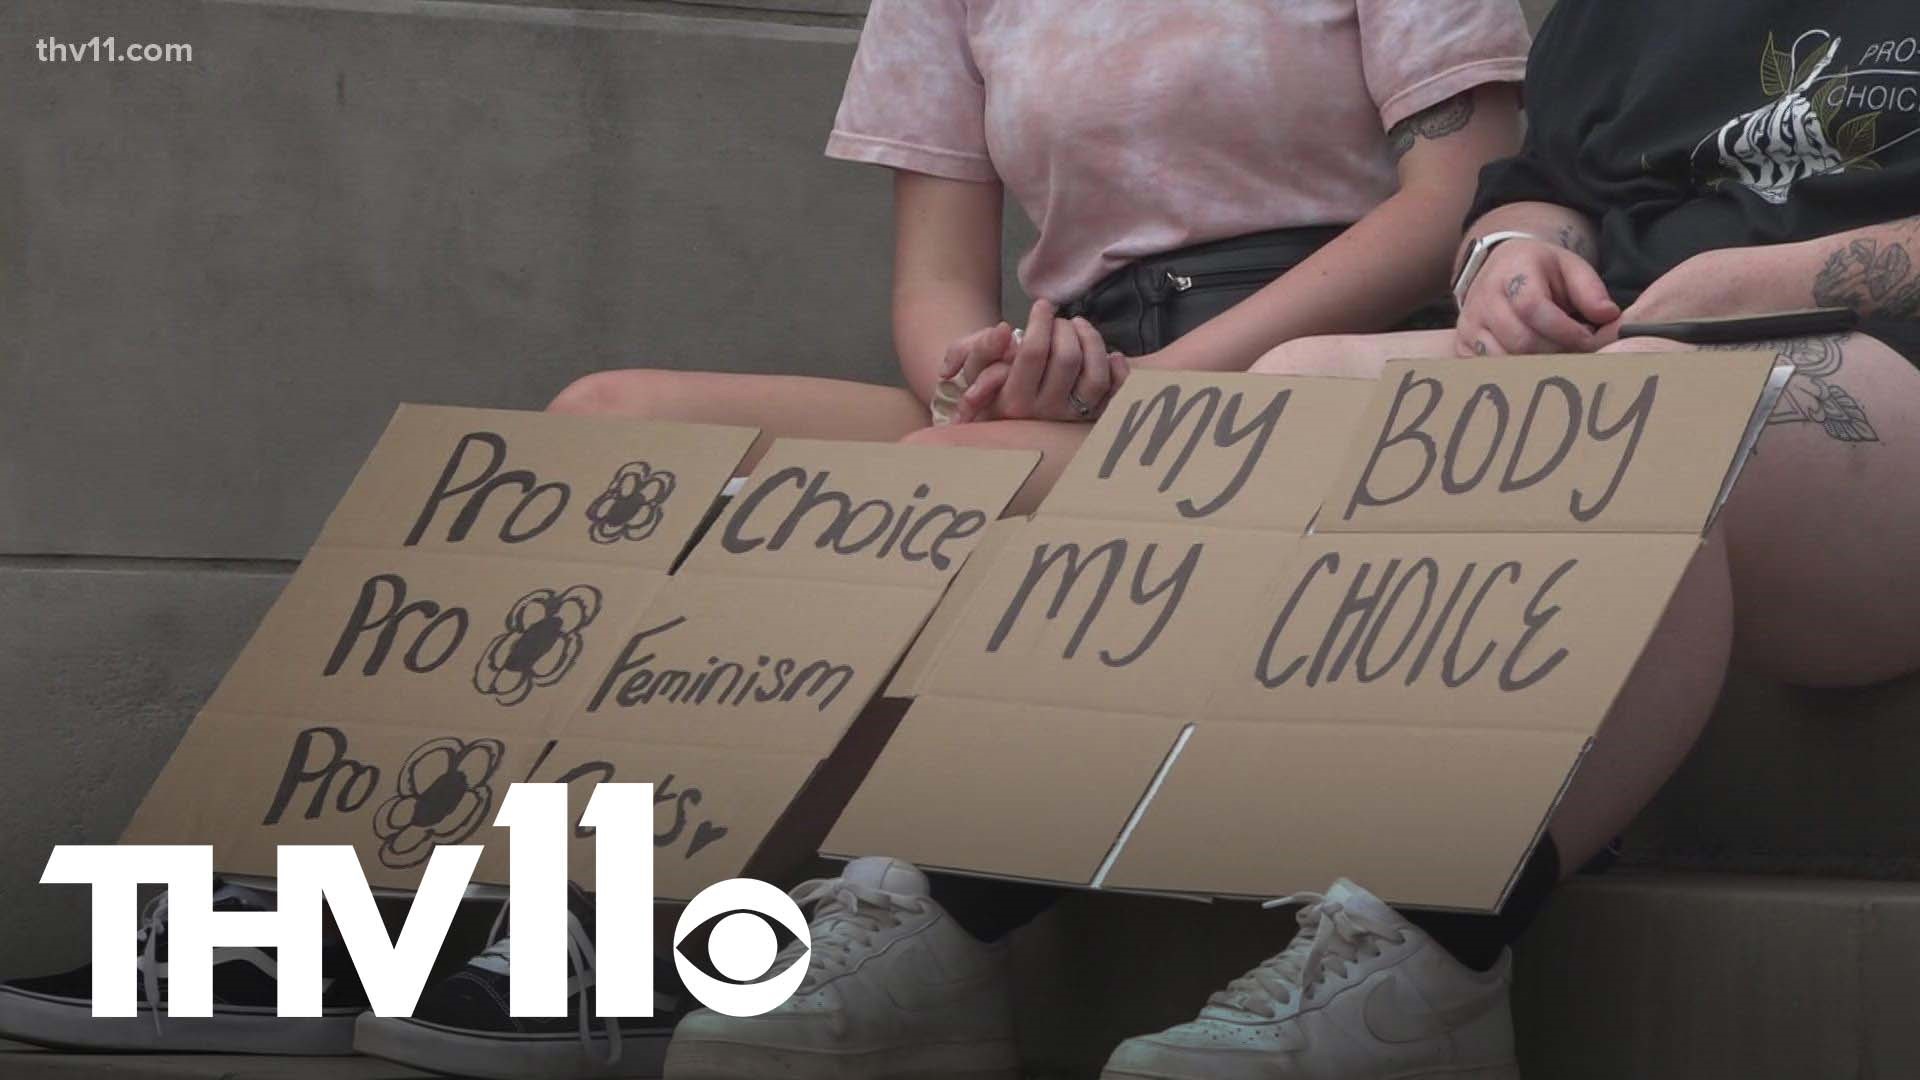 Hundreds of Arkansans arrived in front of the Little Rock State Capitol on Saturday in response to the leaked Supreme Court opinion that would overturn Roe v. Wade.